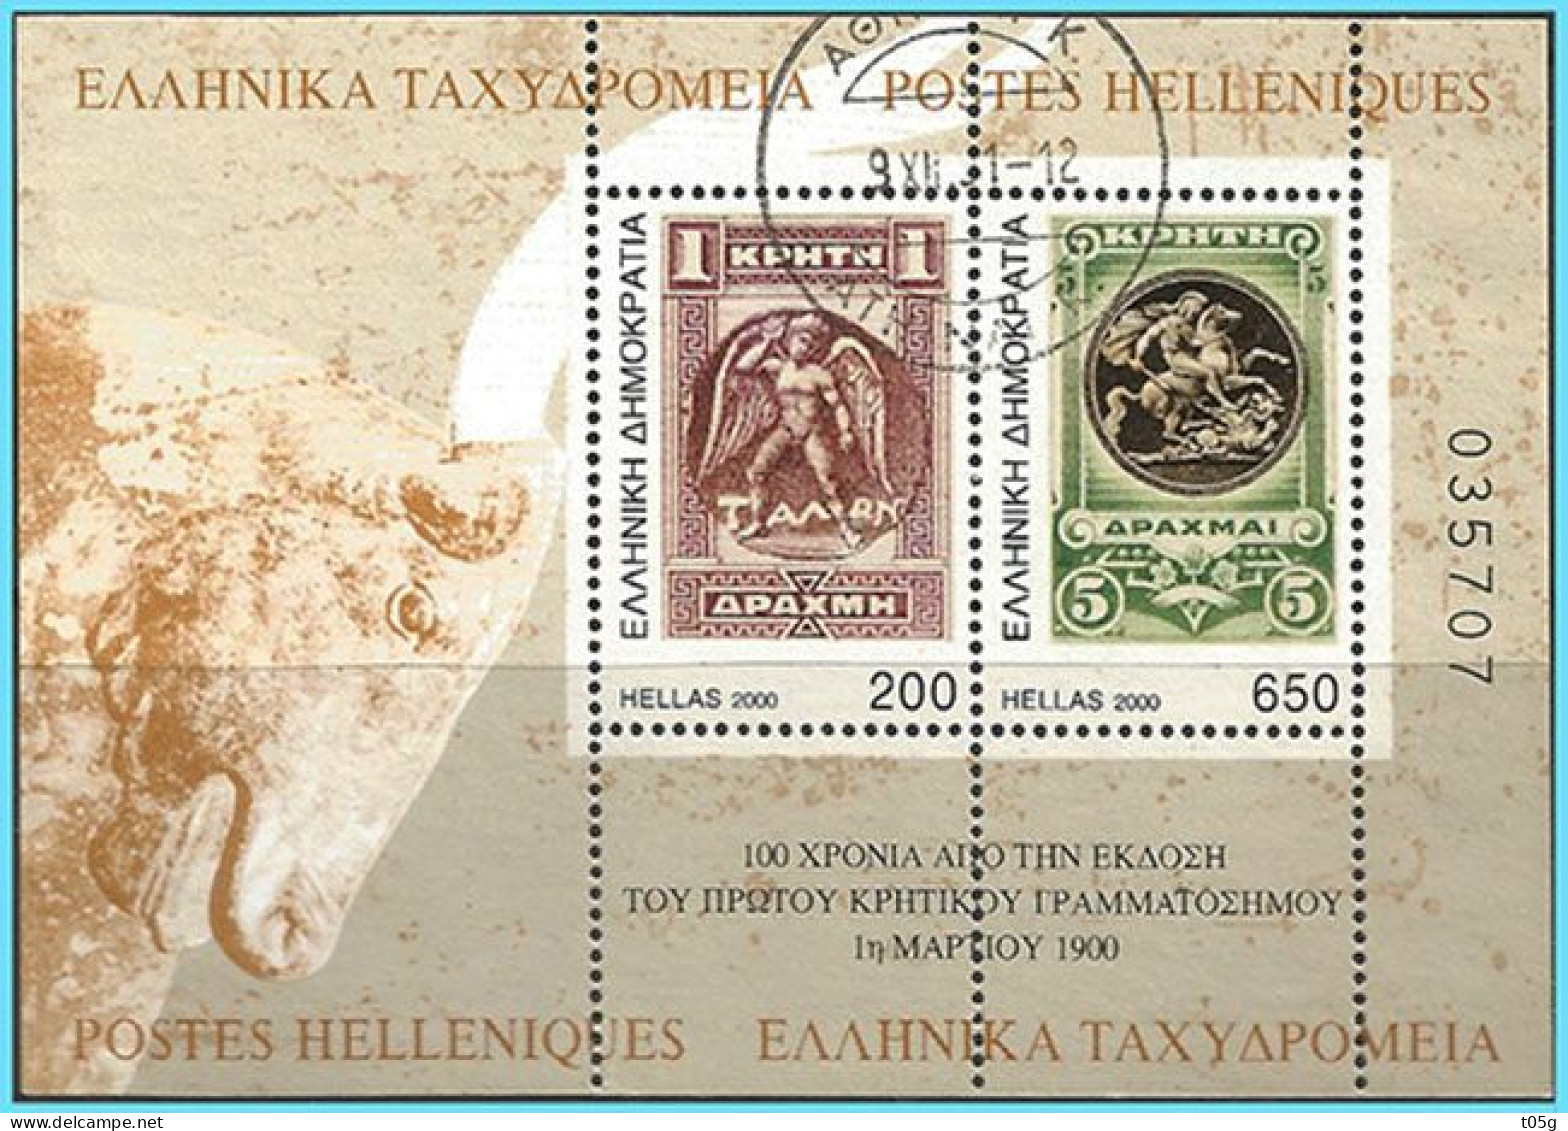 GREECE- GRECE- HELLAS 2000:  The Stamps Of Crete Miniature Sheet Used - Gebraucht